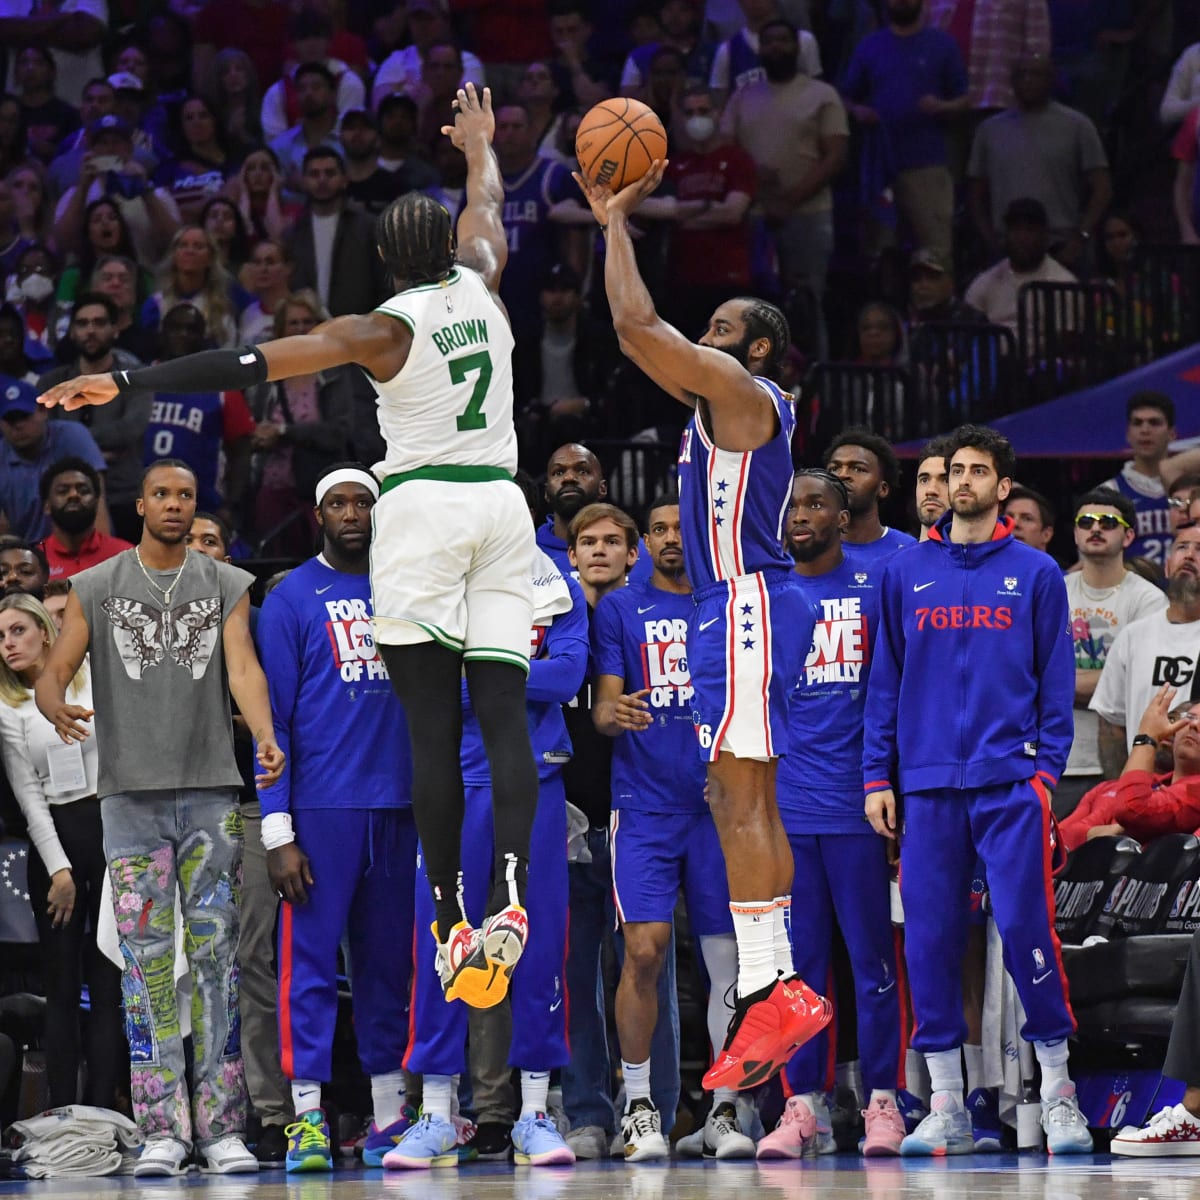 Sixers Bell Ringer: Sixers lose a close one against the Celtics